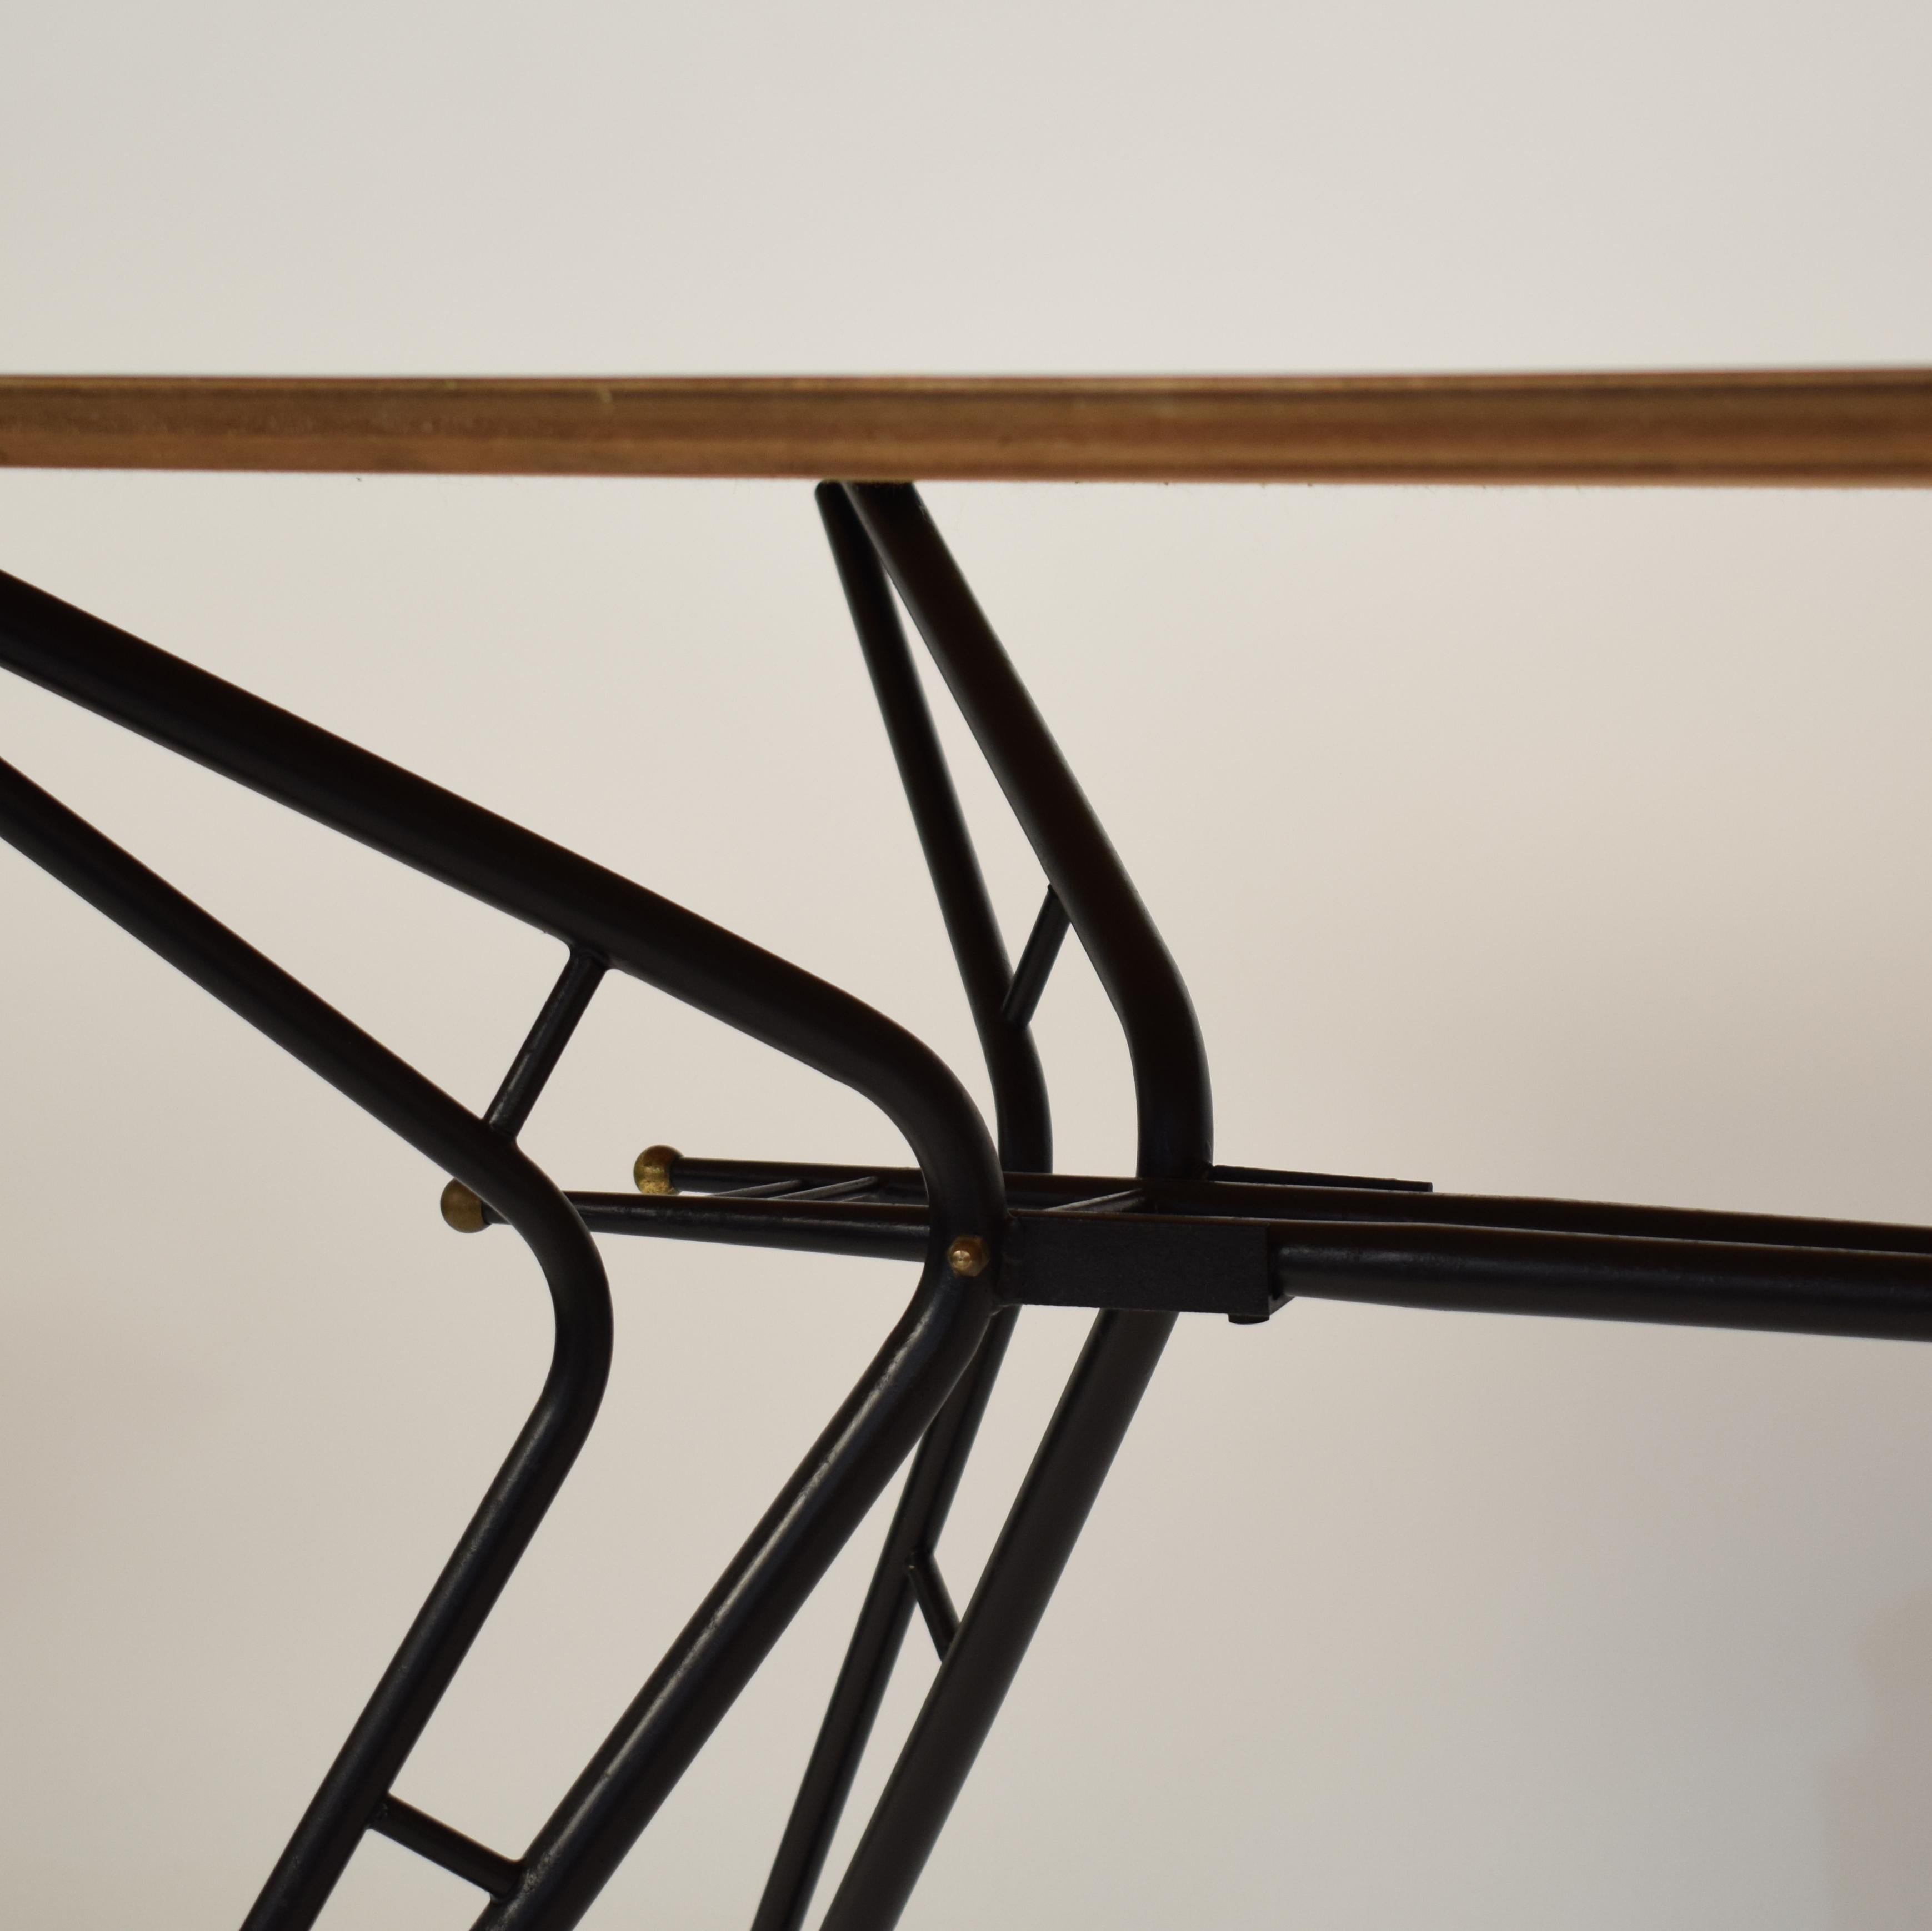 Midcentury Italian Black and White Dining Table Attributed to Ico Parisi, 1958 For Sale 3